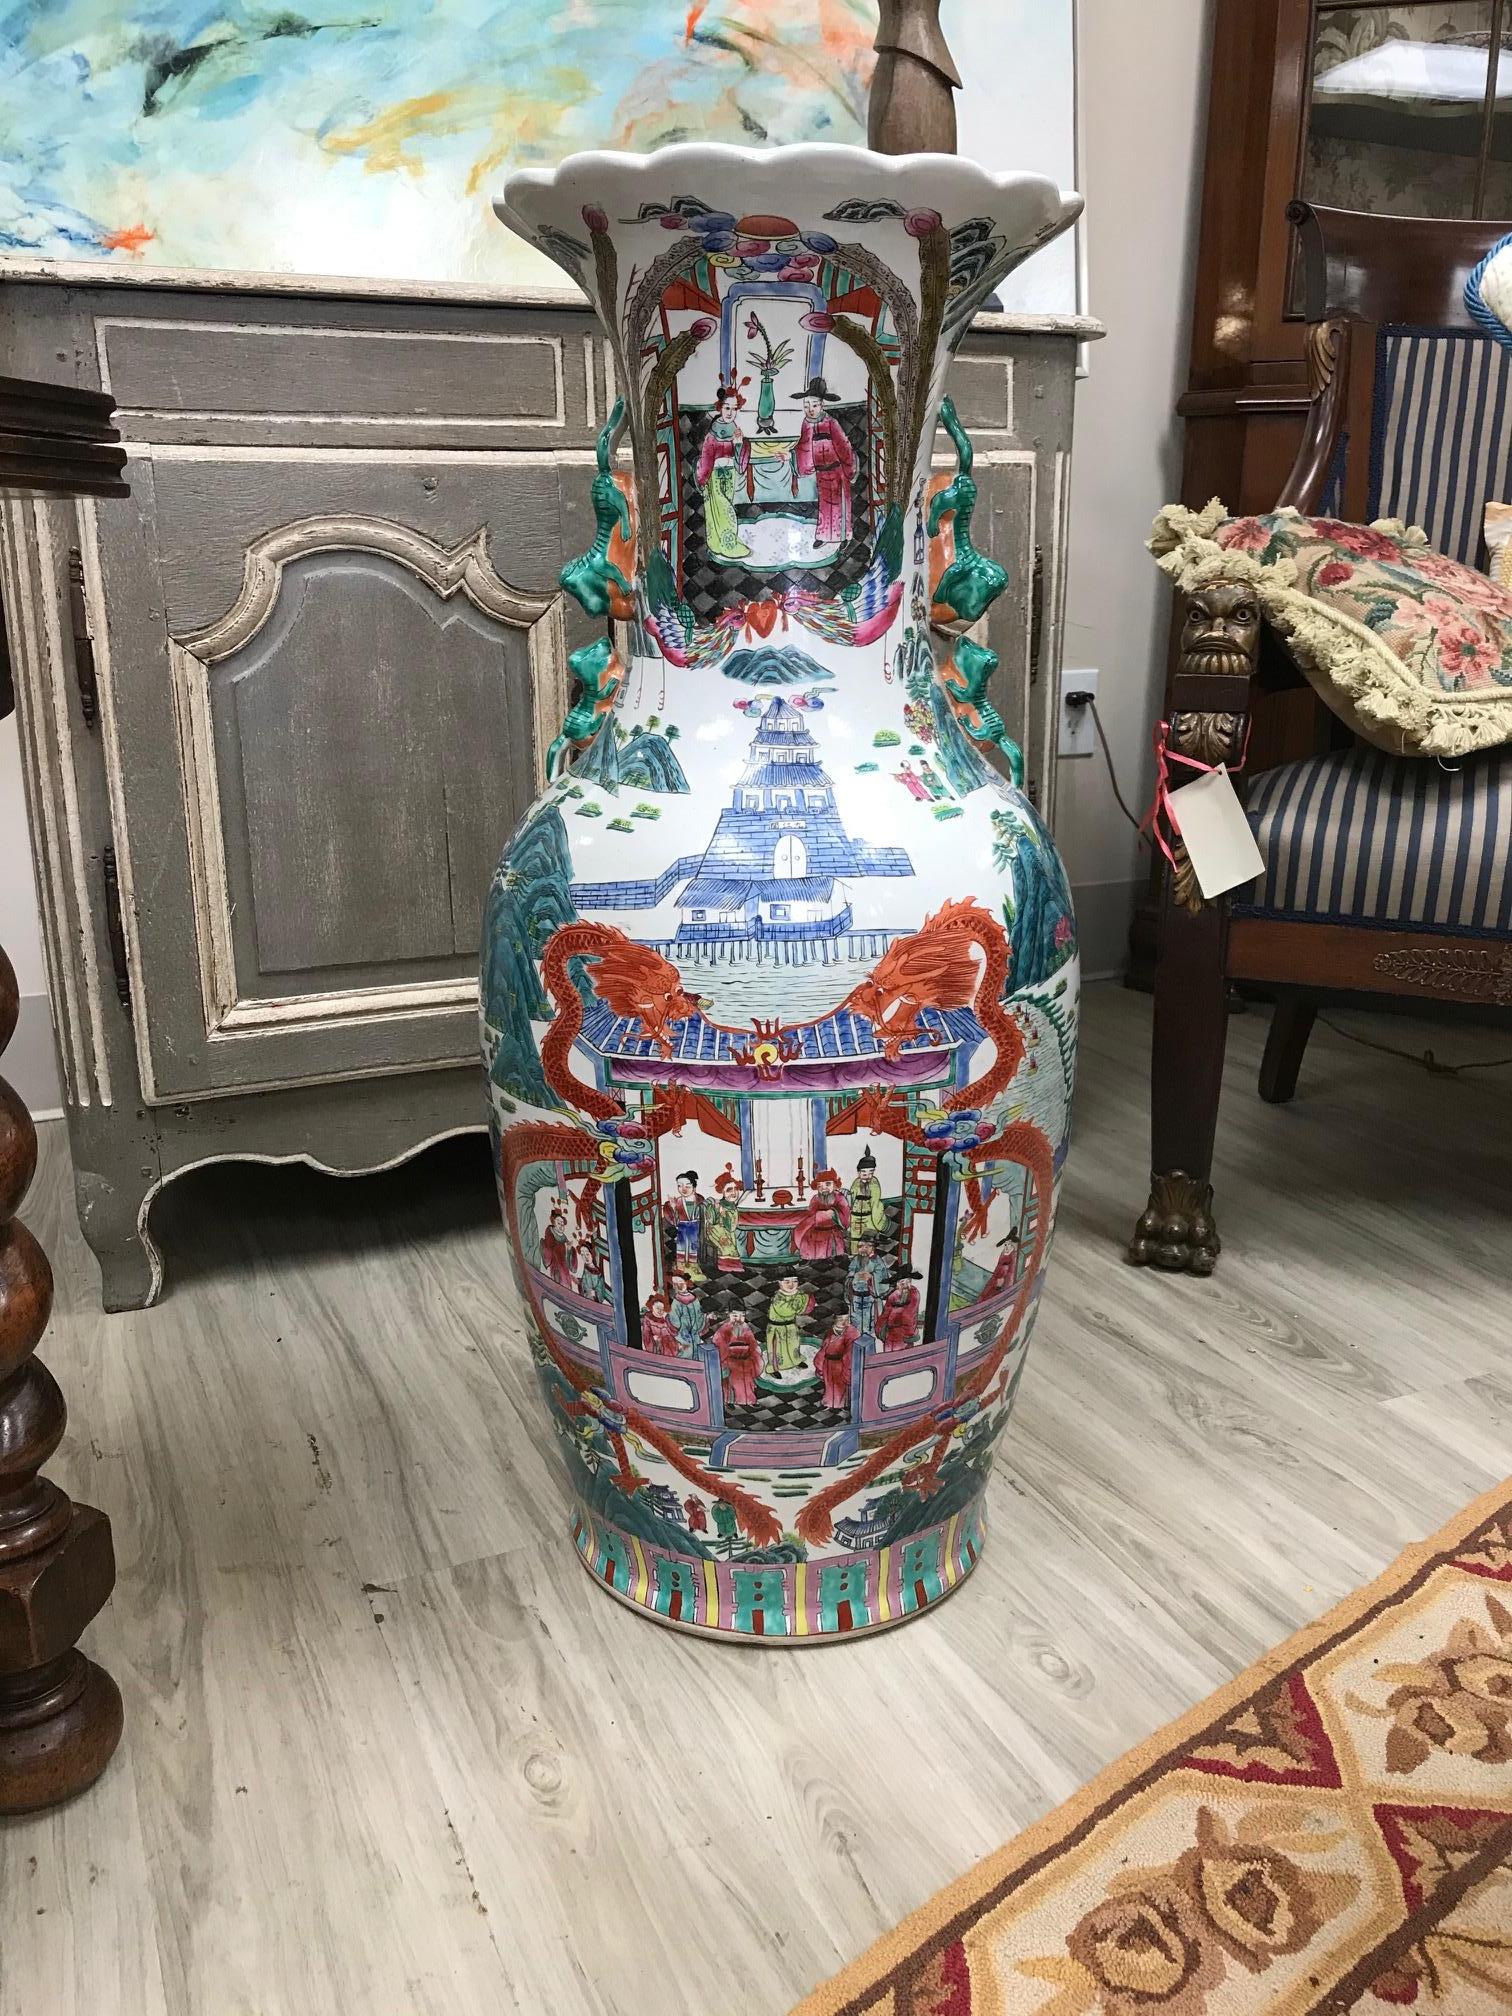 Palace style vase with scenes of both palace and wealth/good fortune. The neck of the vase is adorned with lion and lion cub handles, adding more detail to the vase and scenes.